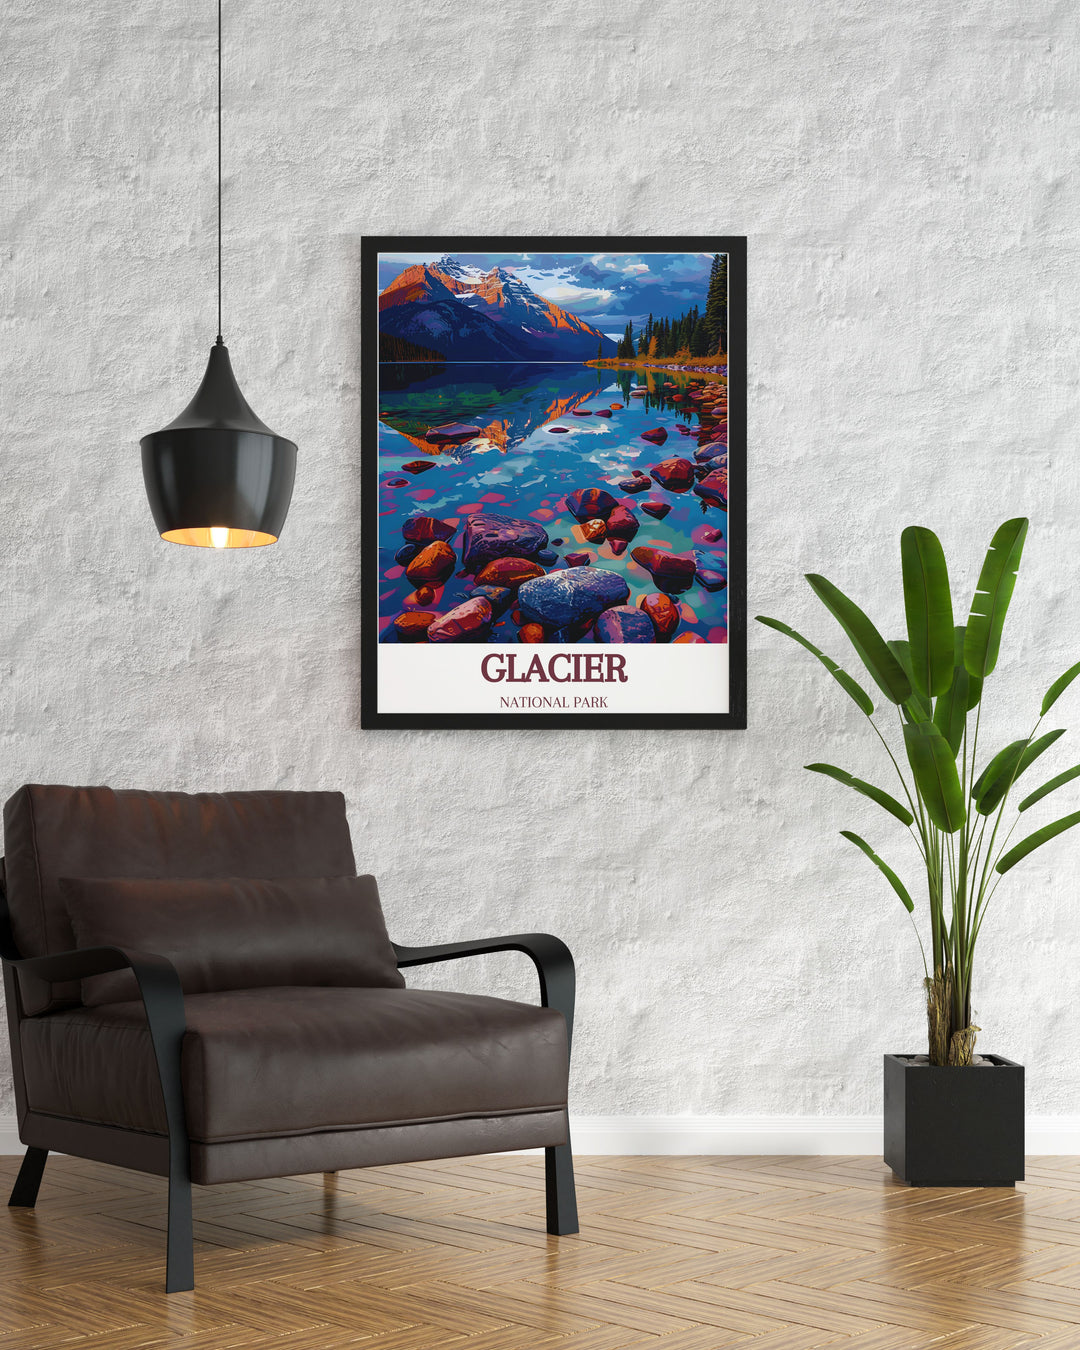 Showcasing the picturesque views of Lake McDonald, this poster is perfect for anyone who loves serene lakes and natural landscapes. The detailed illustrations highlight the lakes clear waters and scenic surroundings, bringing a piece of Glacier National Parks tranquility into your home.